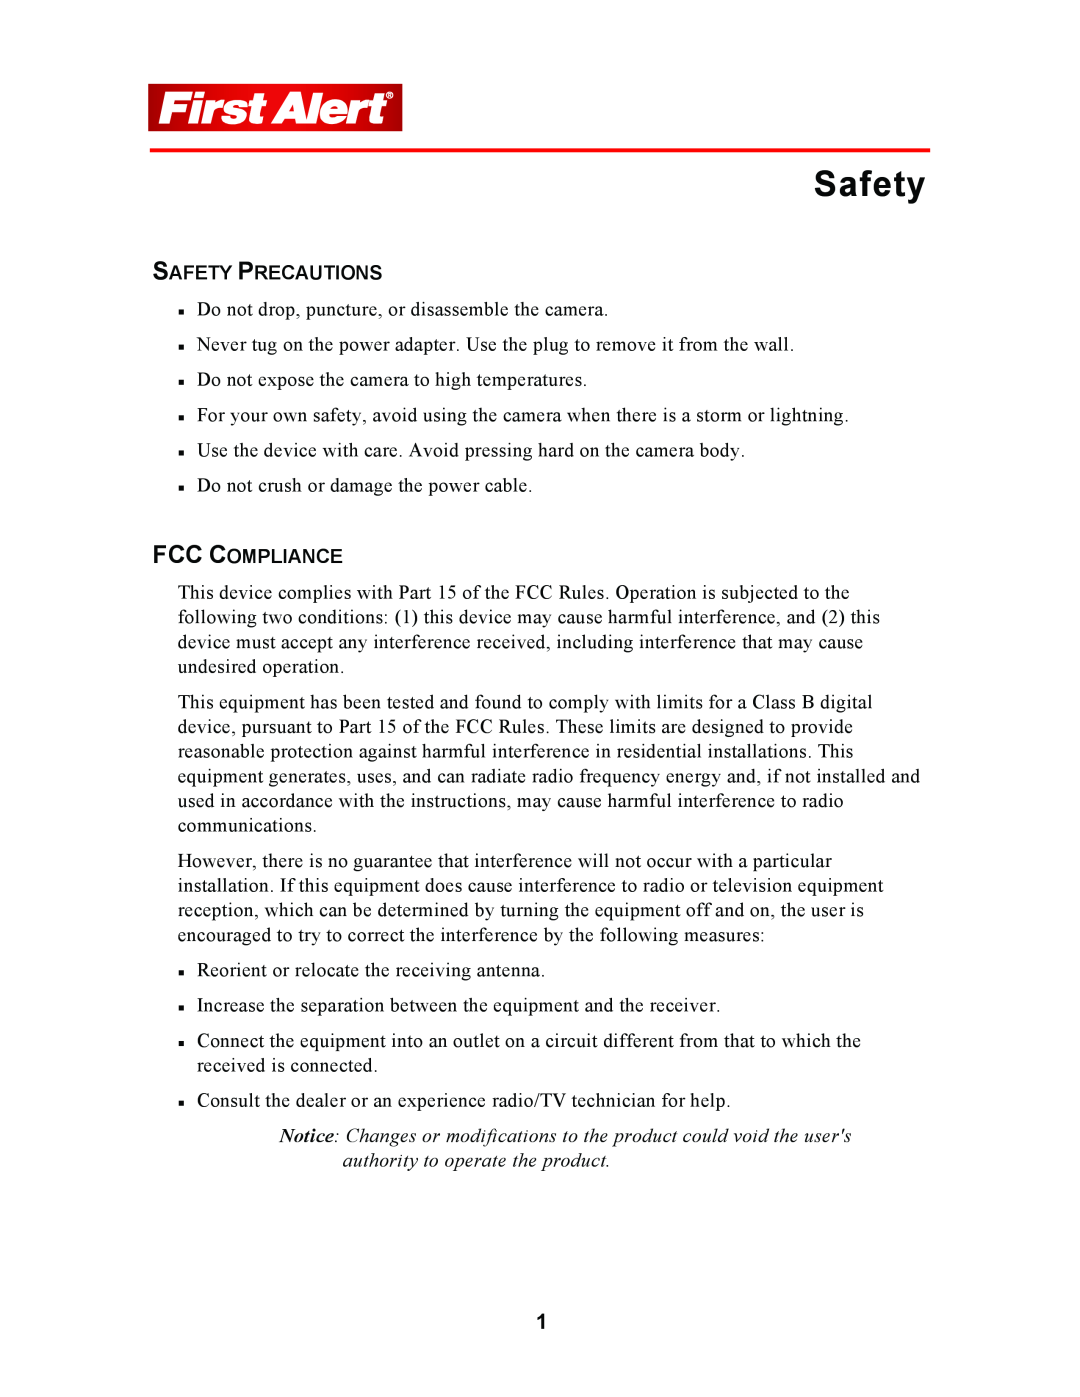 First Alert P-500 user manual Safety Precautions, Fcc Compliance 